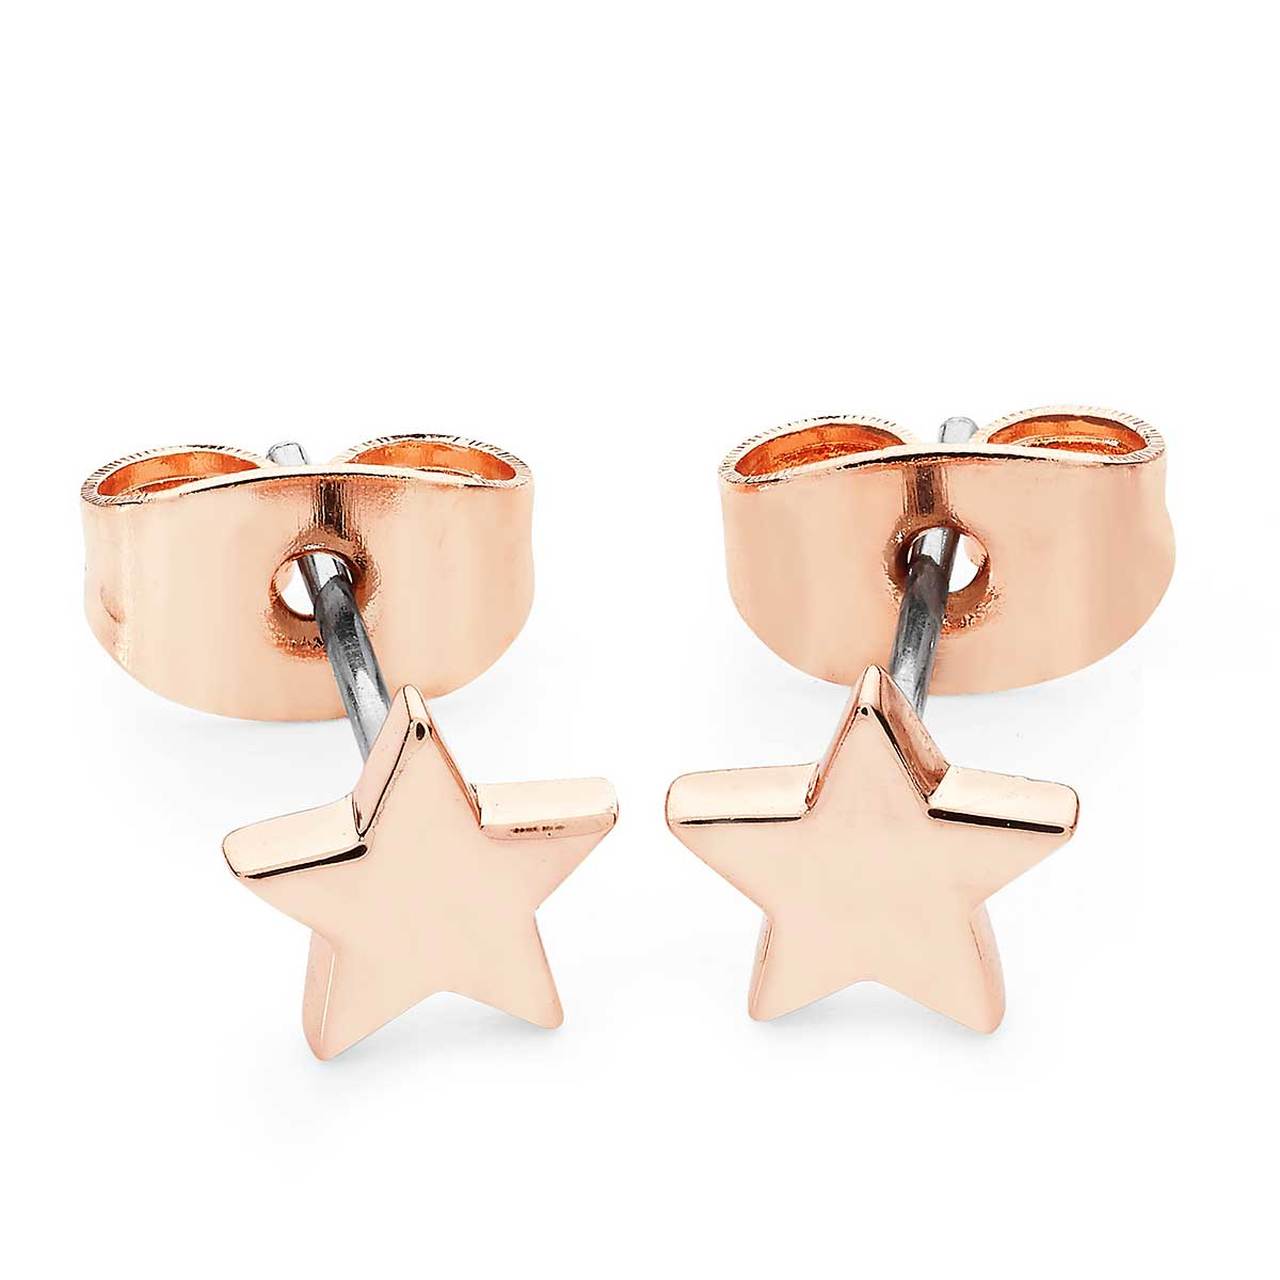 Tipperary Crystal Star Mini Stud Earrings Rose Gold  These dainty stud earrings are sweet and simple. Crafted in polished metal they are available in rose gold, champagne gold and silver and secure safely with pushbacks.